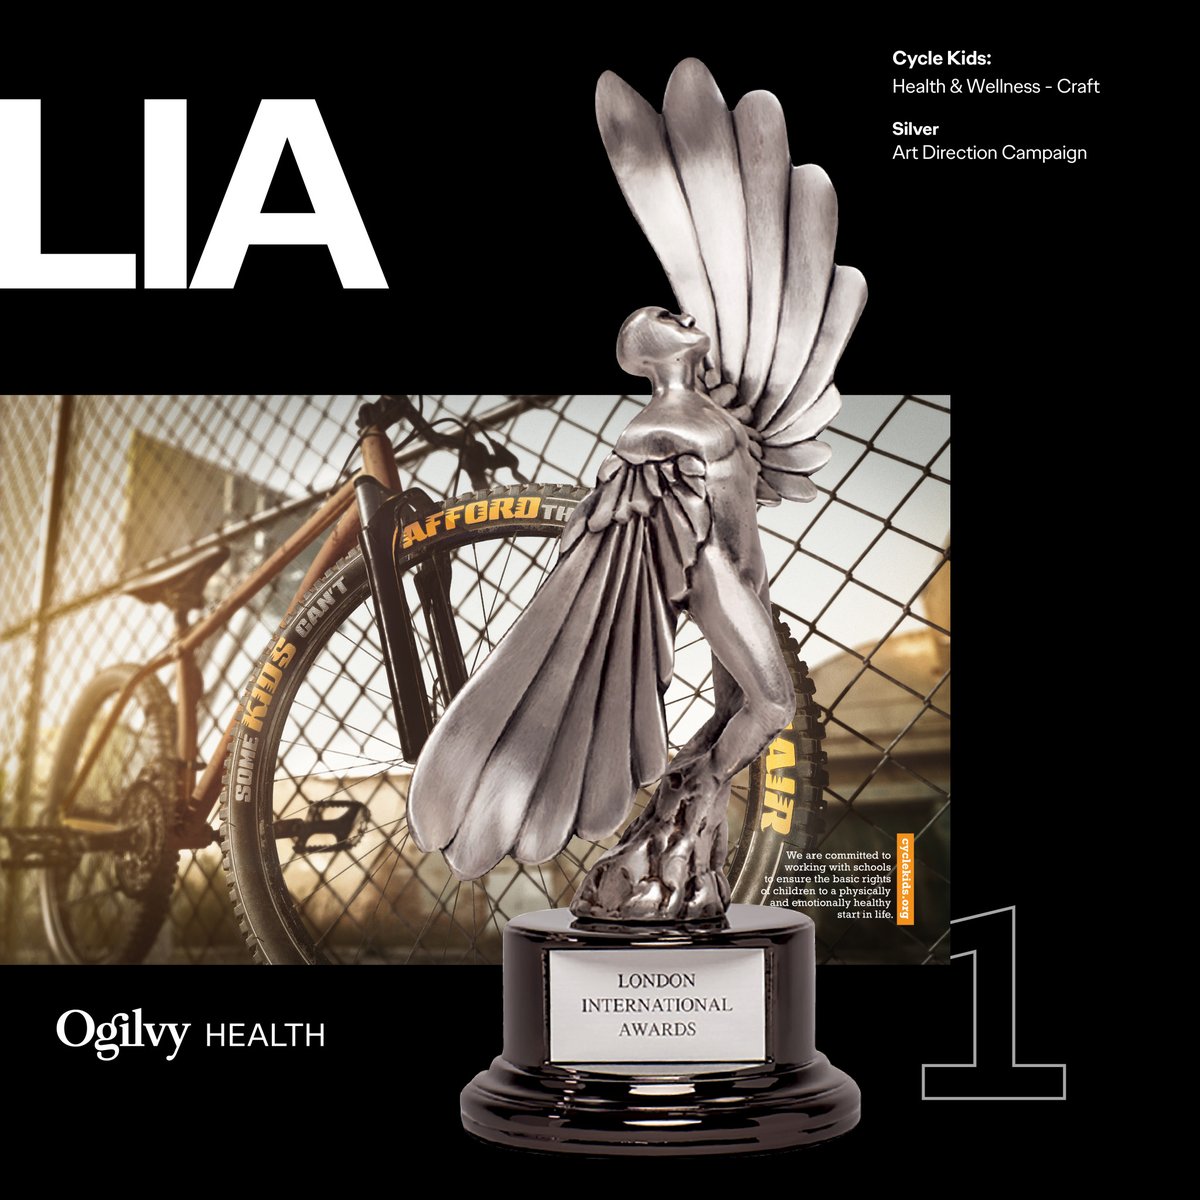 Congratulations to @CYCLEKids on their SILVER LIA Award! We loved the #BorderlessCreativity this campaign demonstrates, and are so thankful to have had a chance to collaborate and show kids everywhere they are stronger than they think. #ClientWork